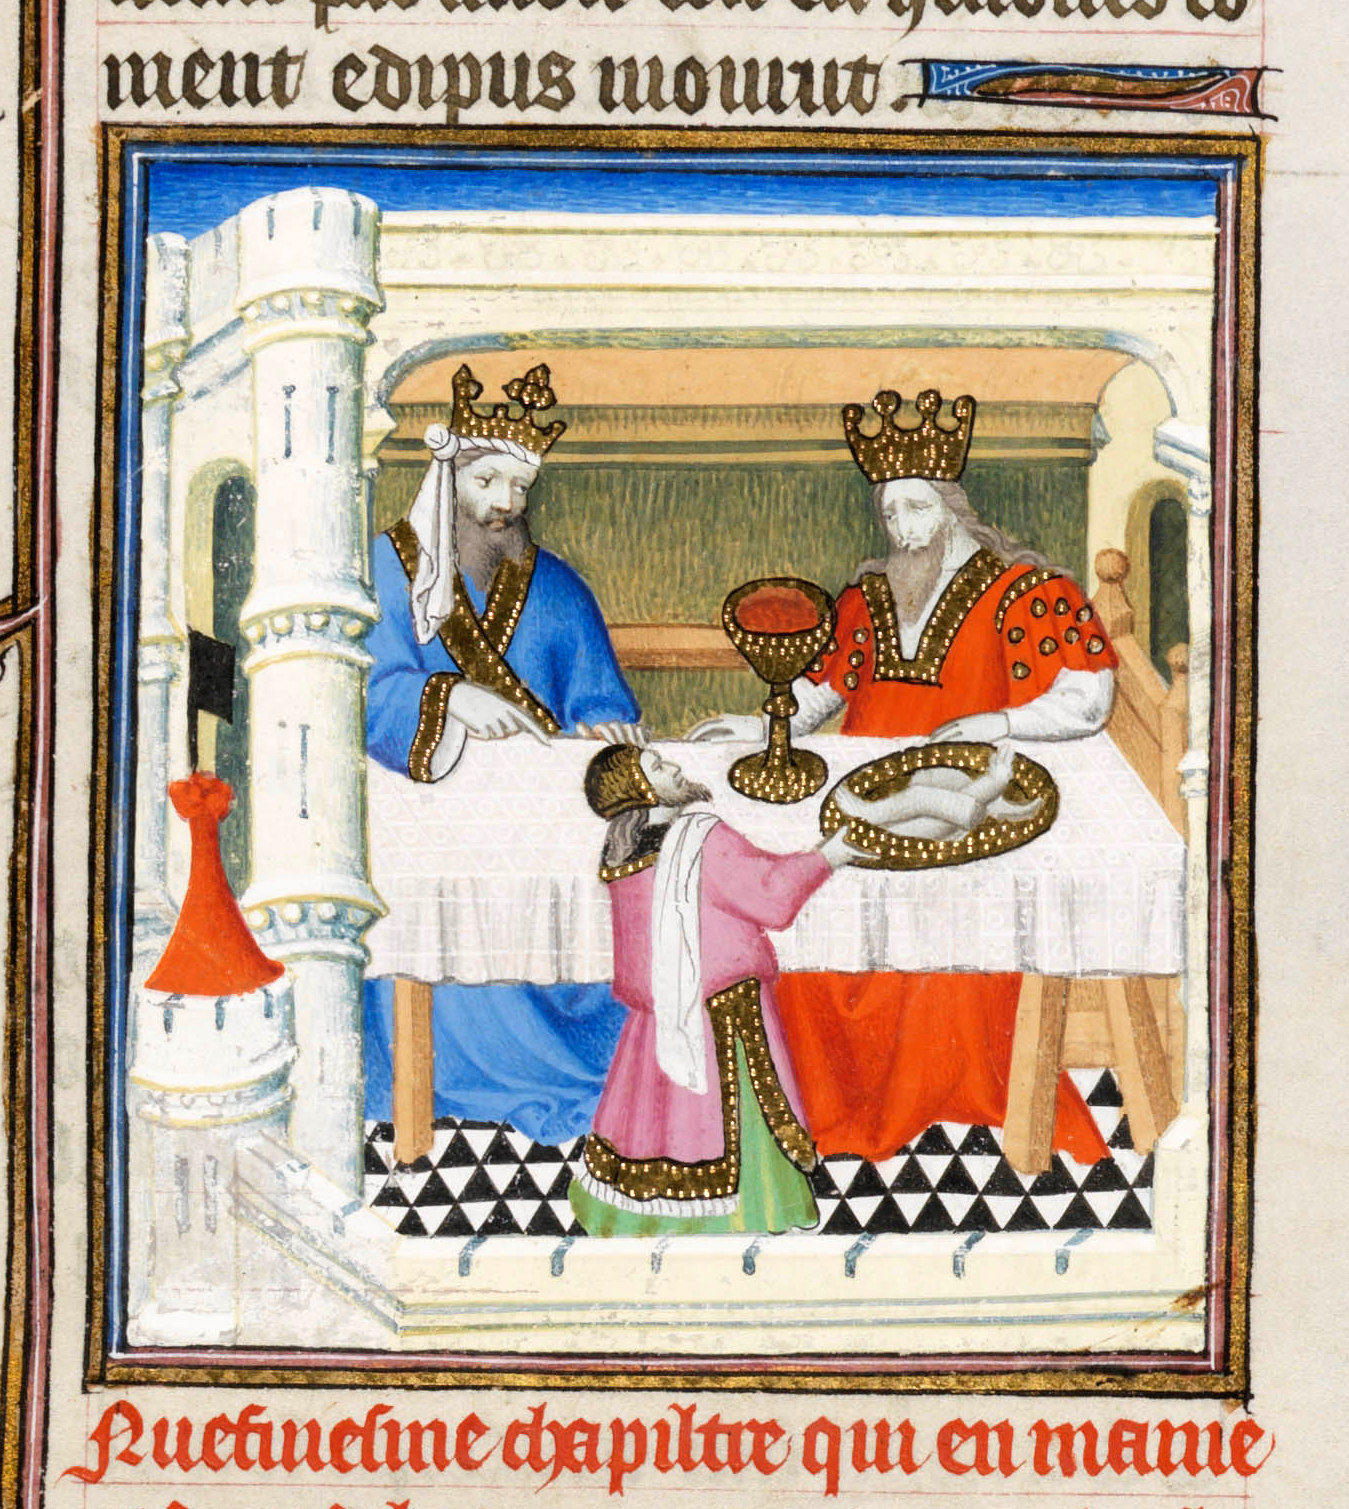 A darkly humorous medieval manuscript depicting a king and queen engaging in an unconventional meal.